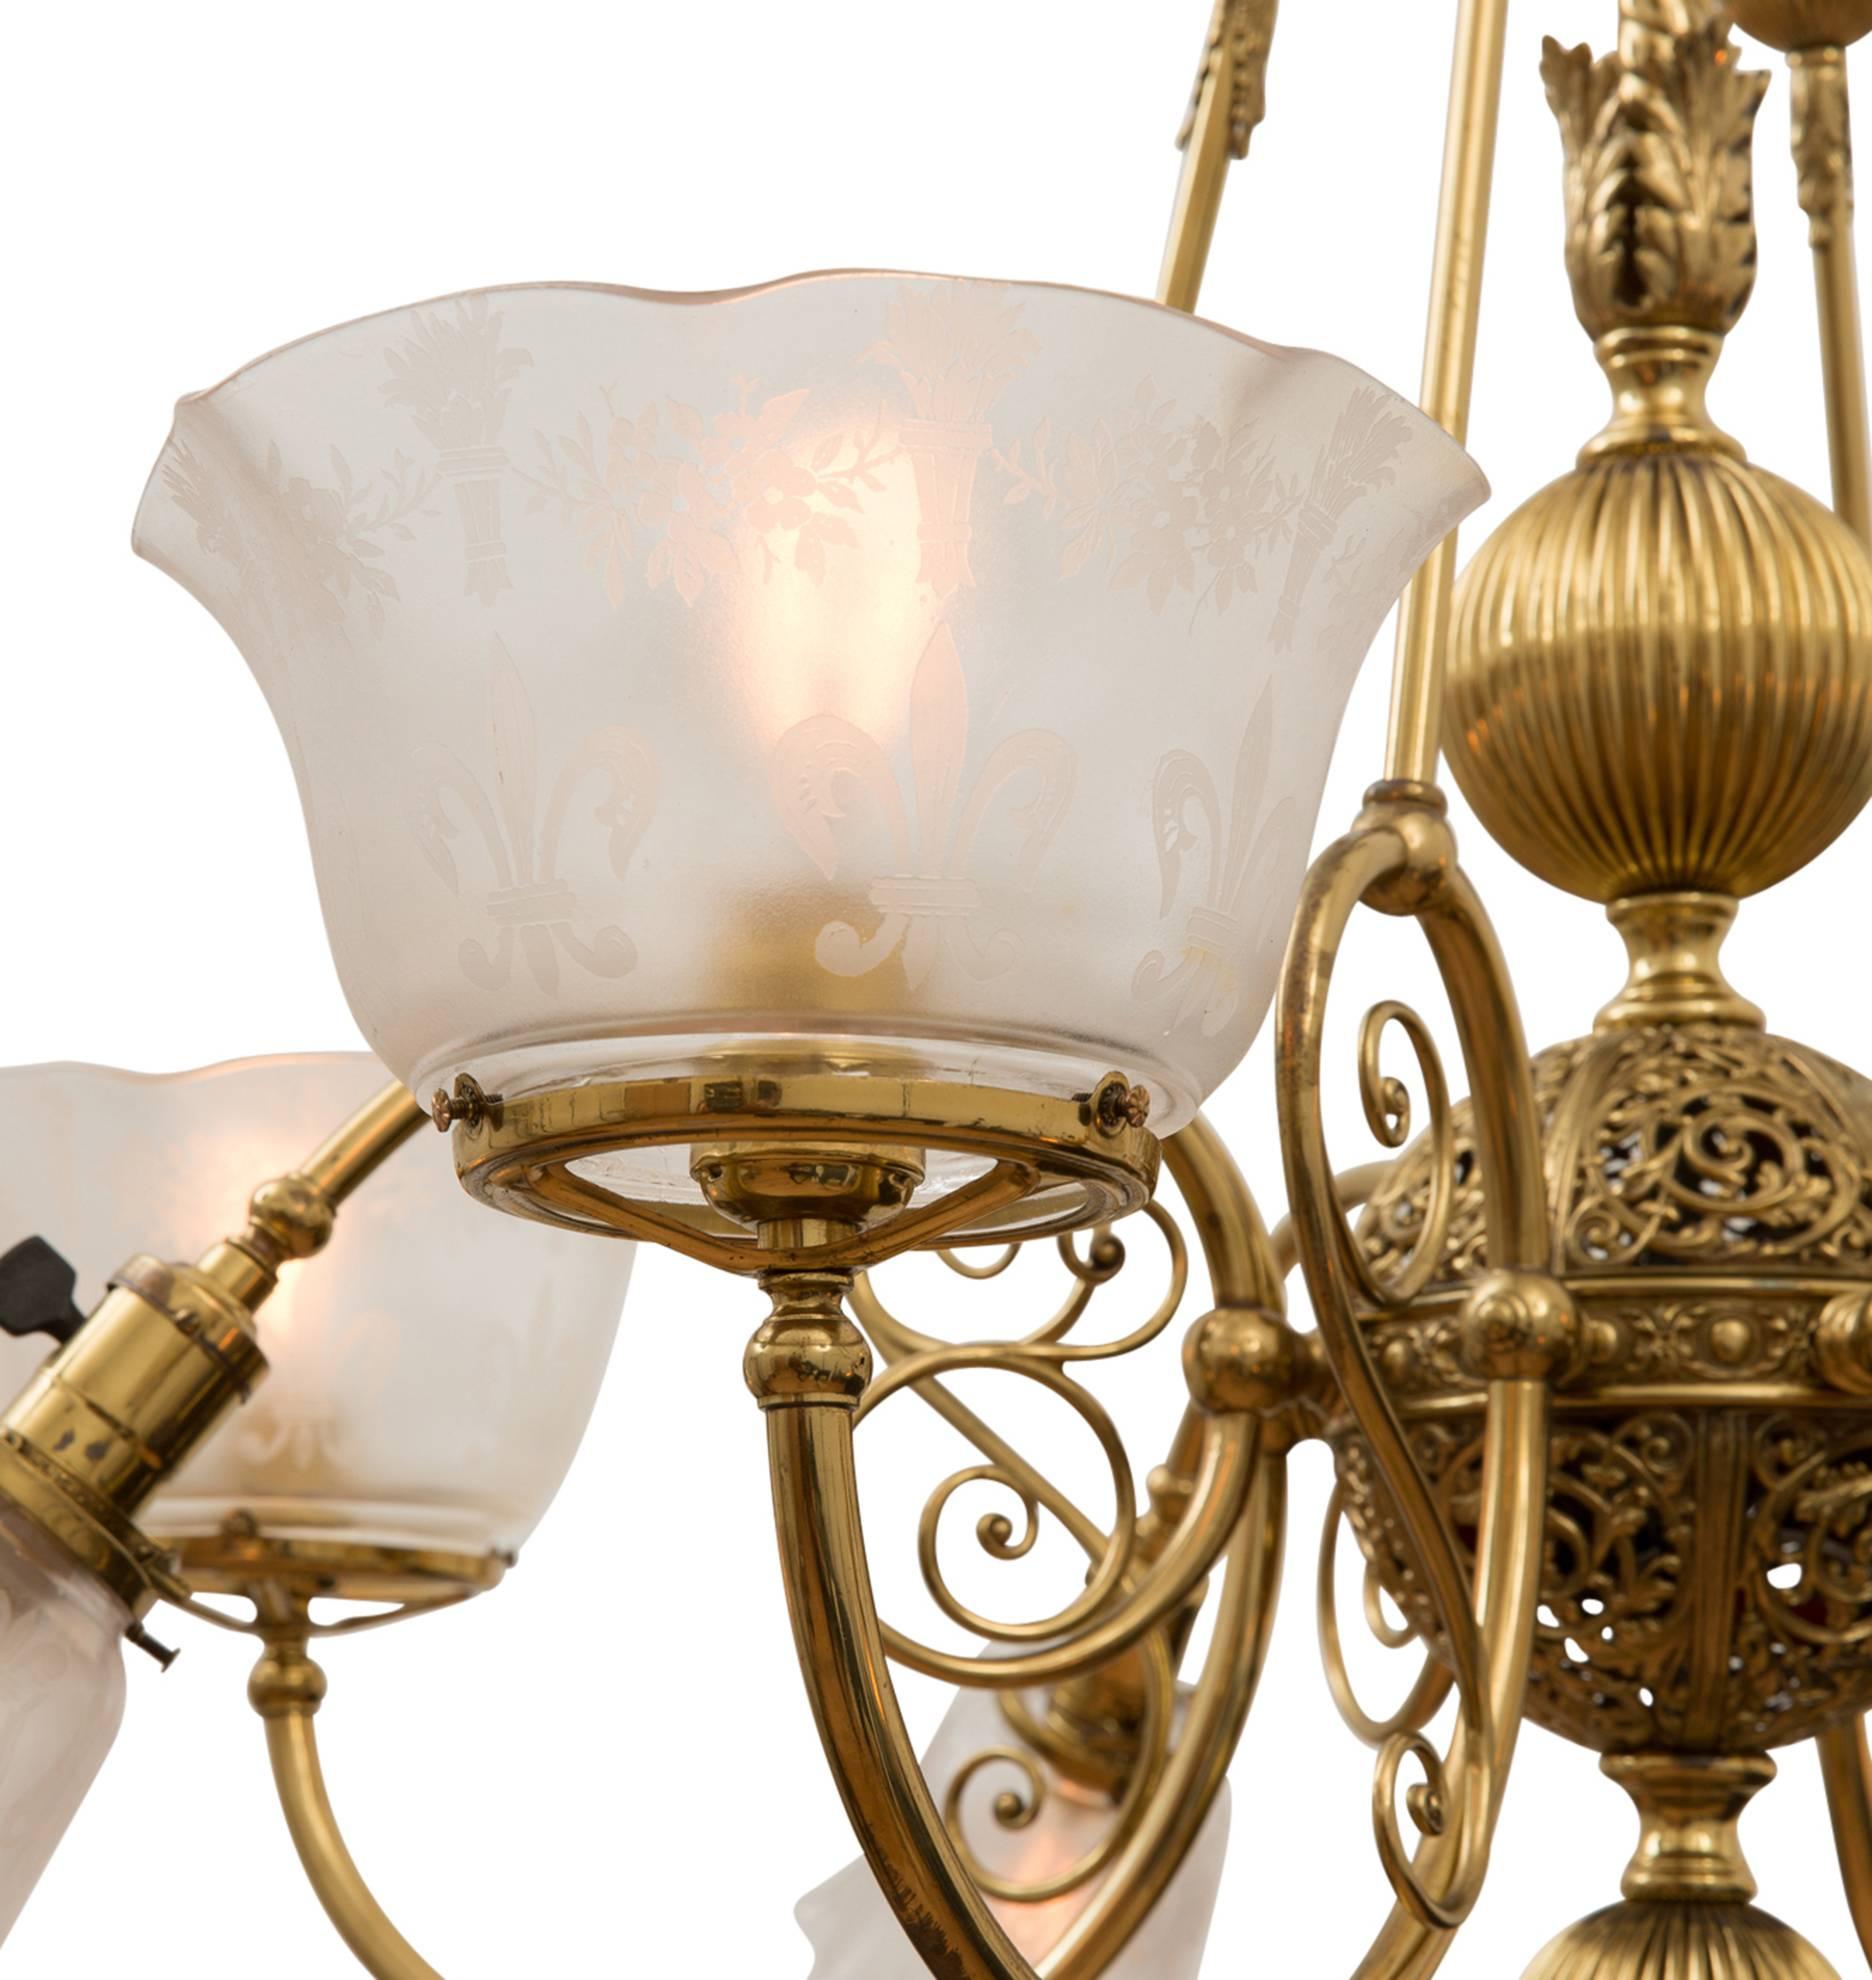 Victorian Gas/Electric Empire Chandelier with Brass-Plated Finish, circa 1900